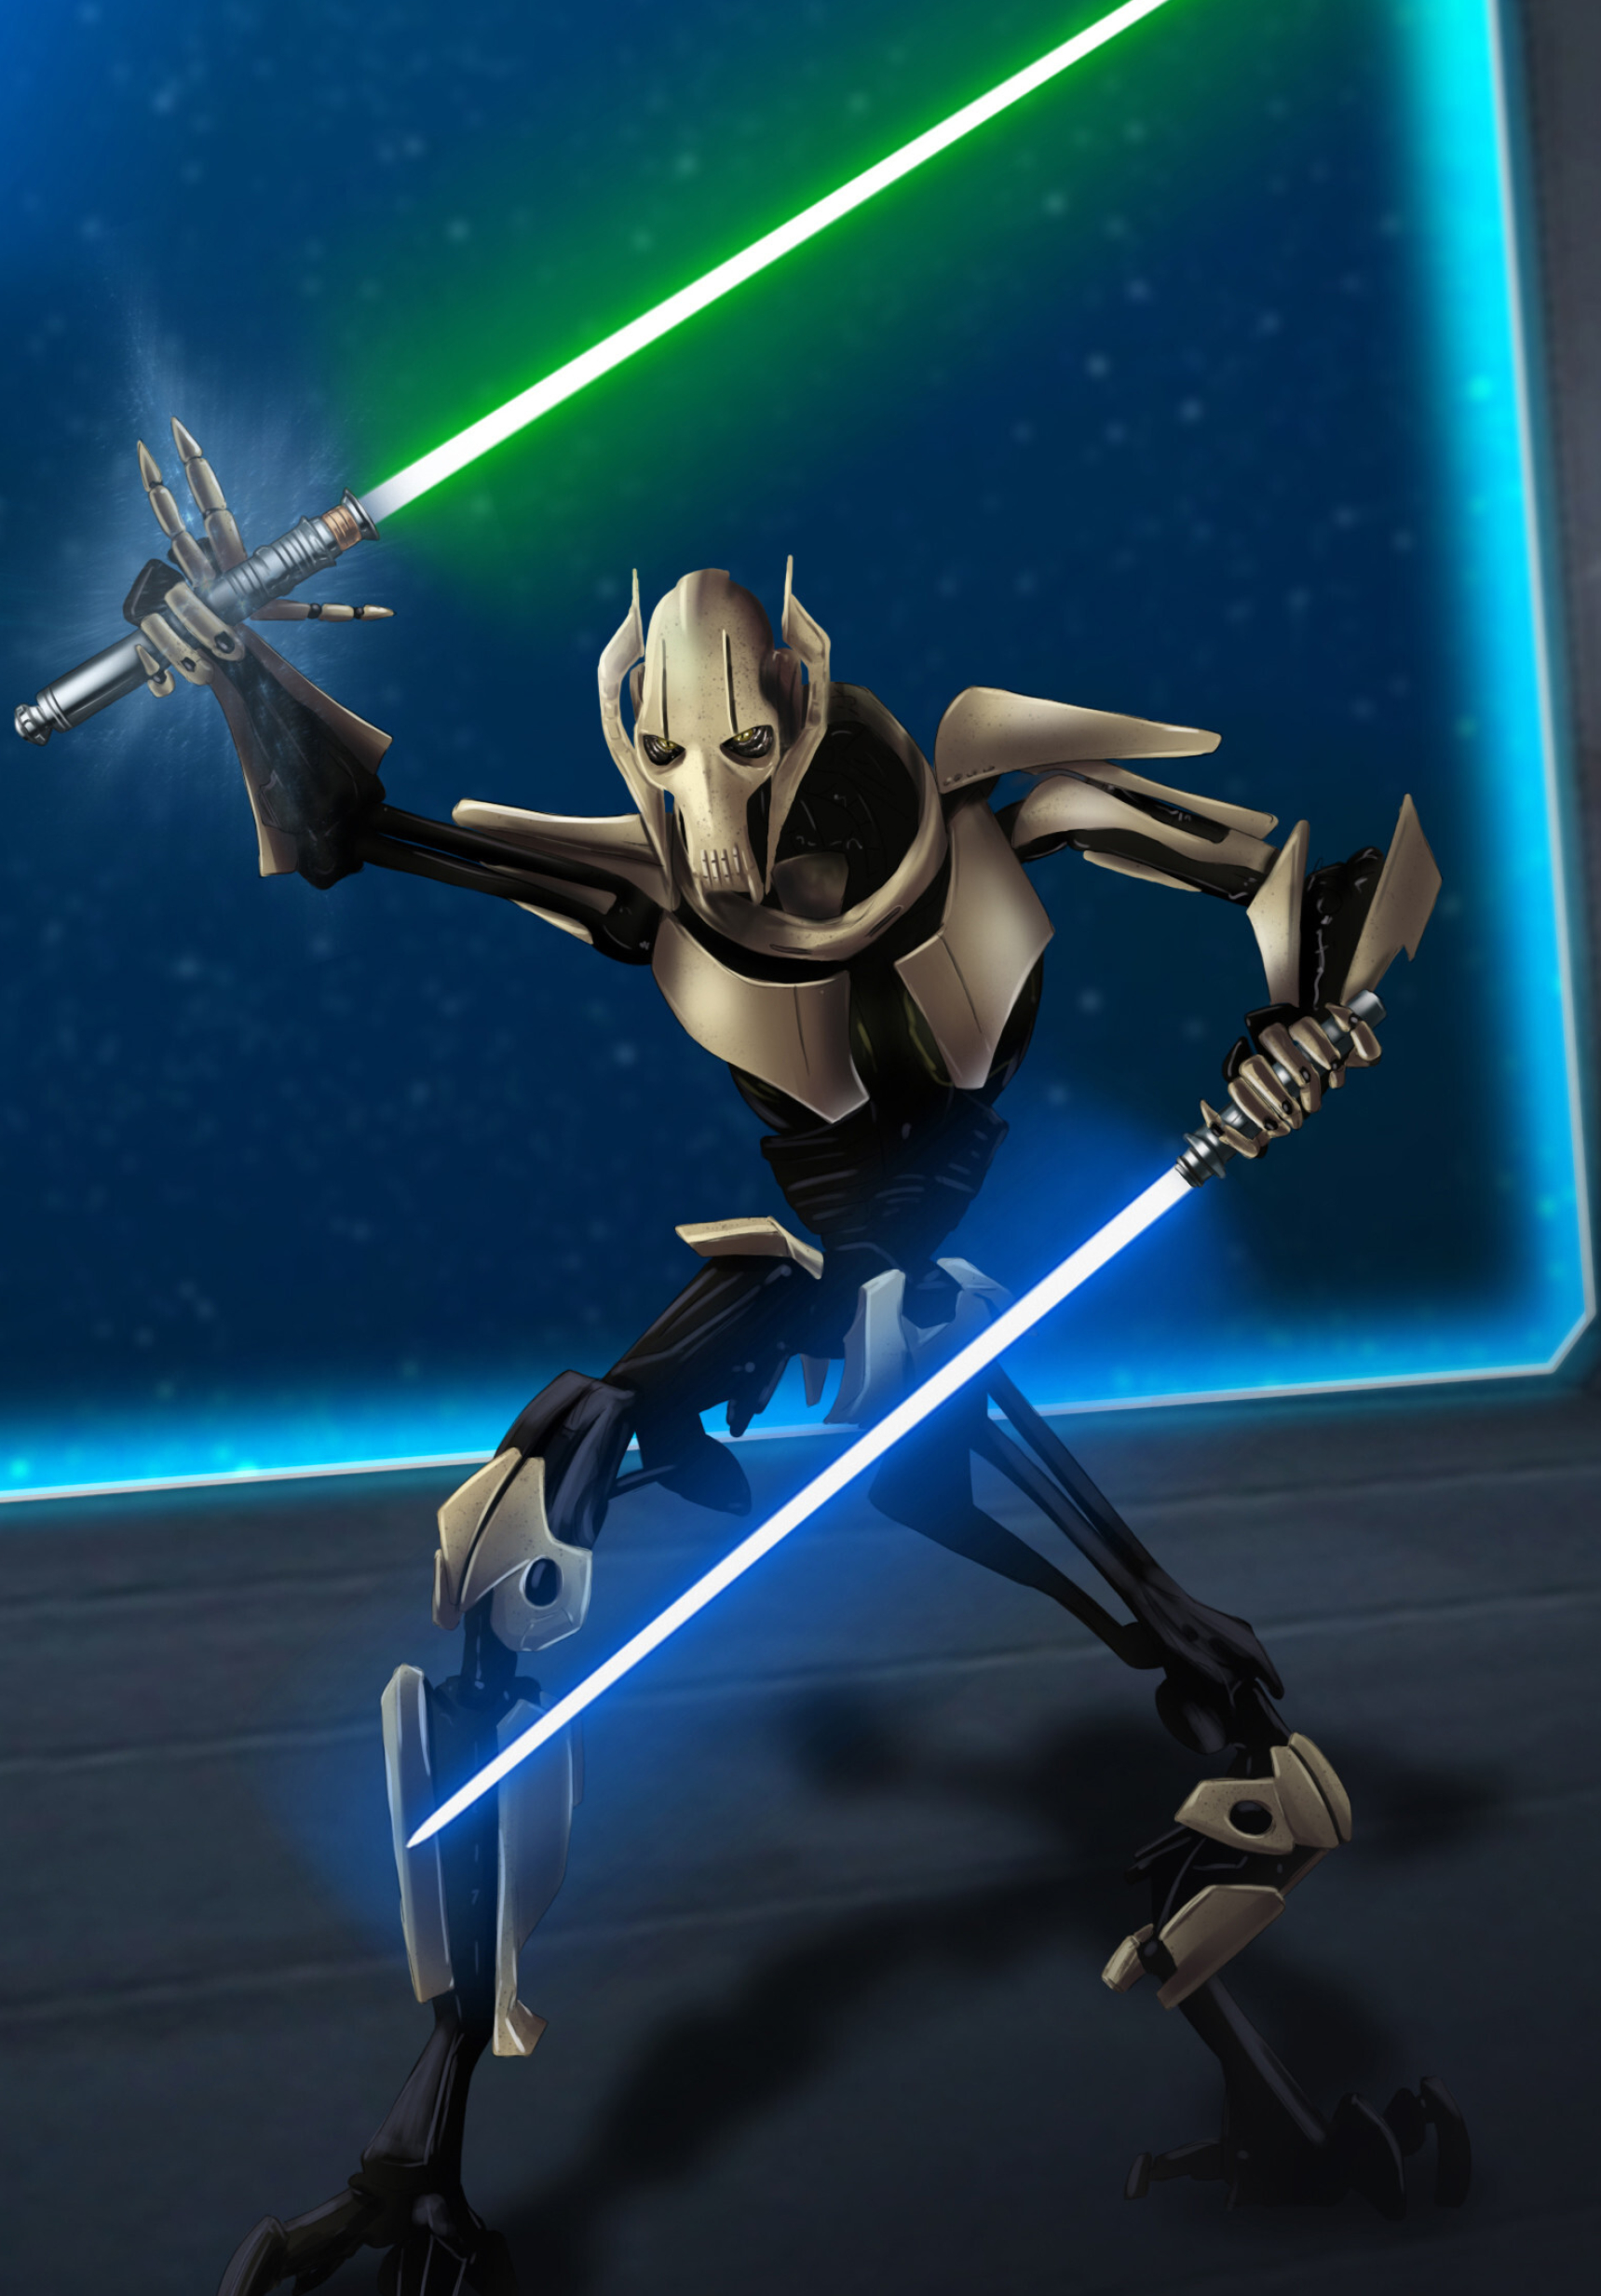 General Grievous: One of the franchise's most iconic villains, A cult following, The popularity within the Star Wars fandom. 1720x2470 HD Wallpaper.